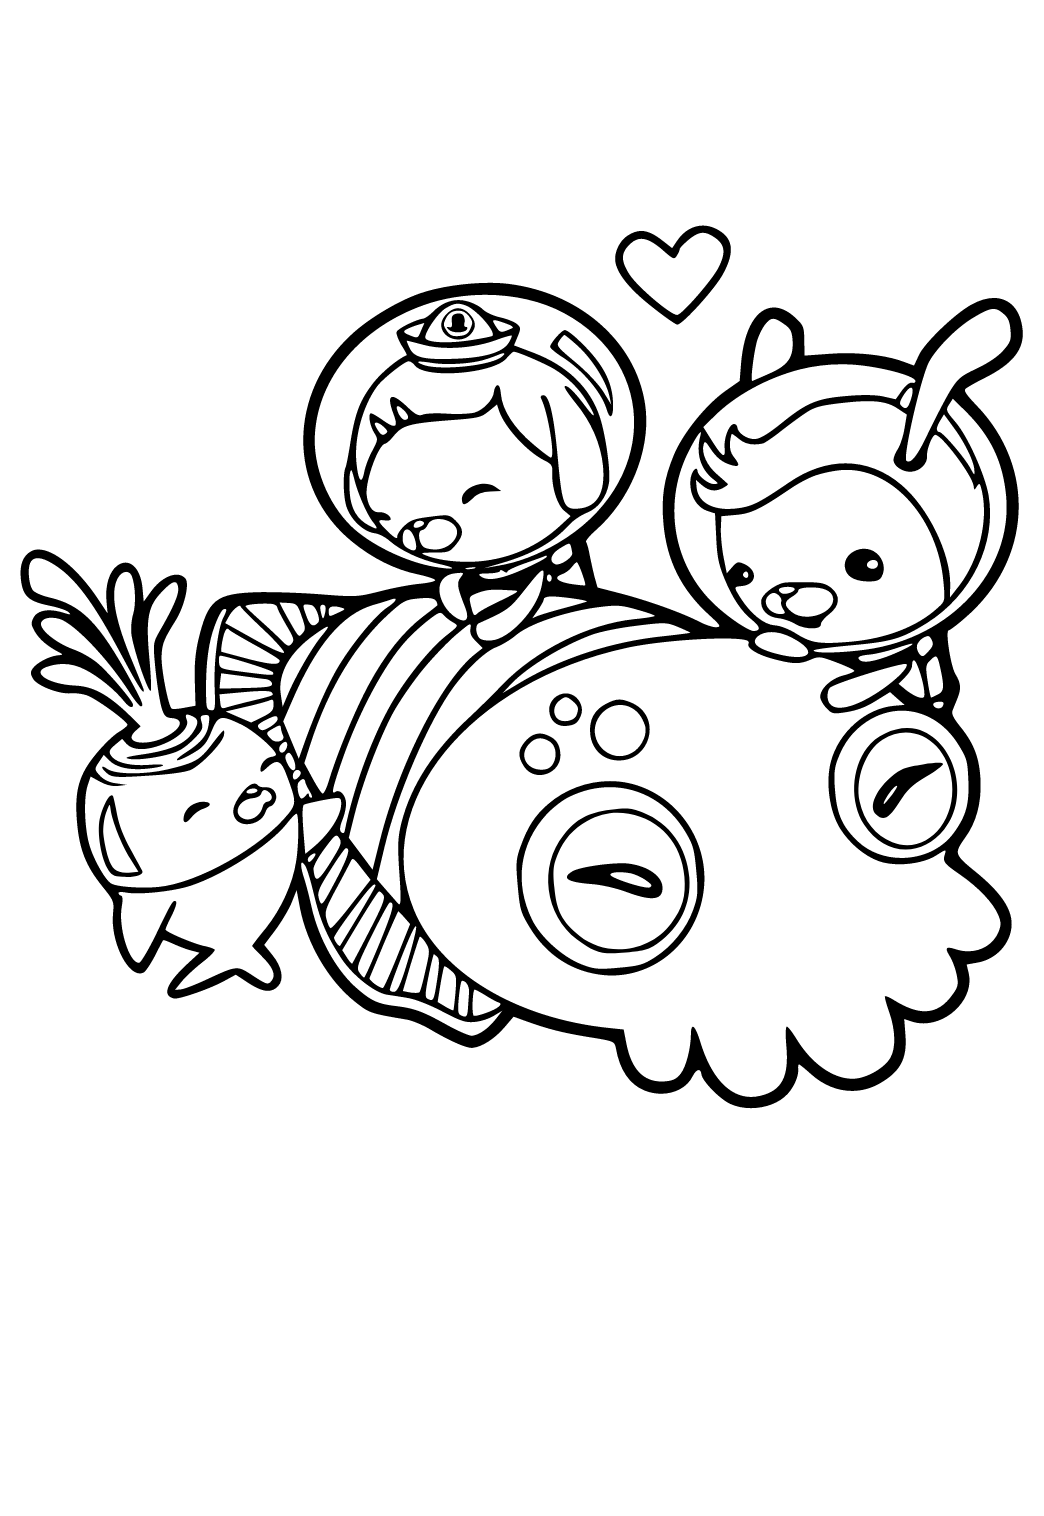 Free printable octonauts characters coloring page for adults and kids